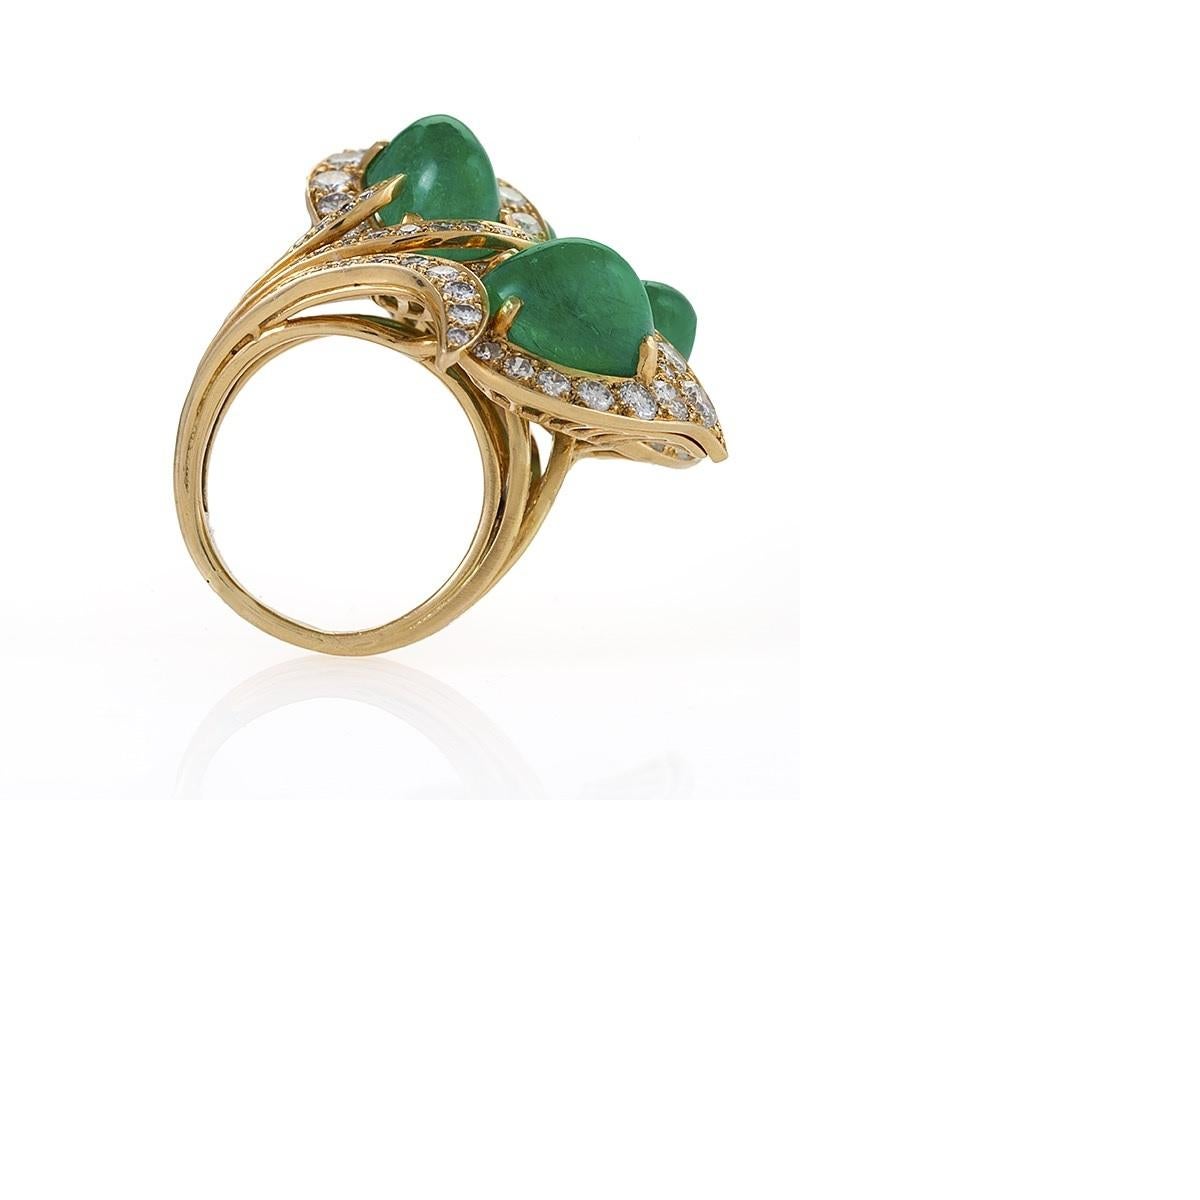 Women's Gold Ring with Diamonds and Emeralds by Marchak